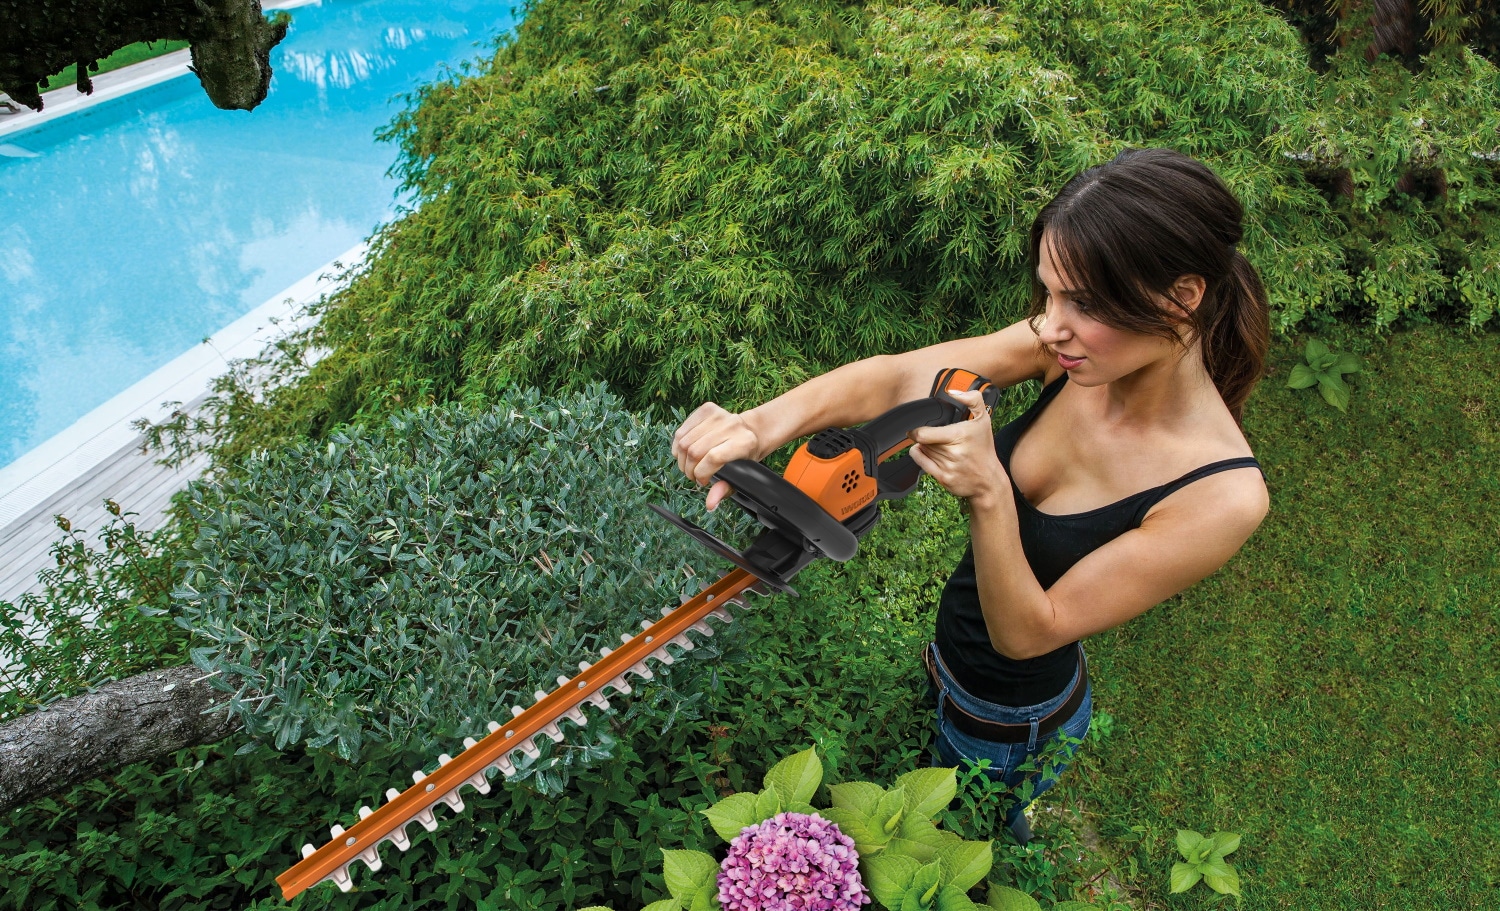 6 Best Electric Hedge Trimmers the Market Has to Offer (Summer 2022)